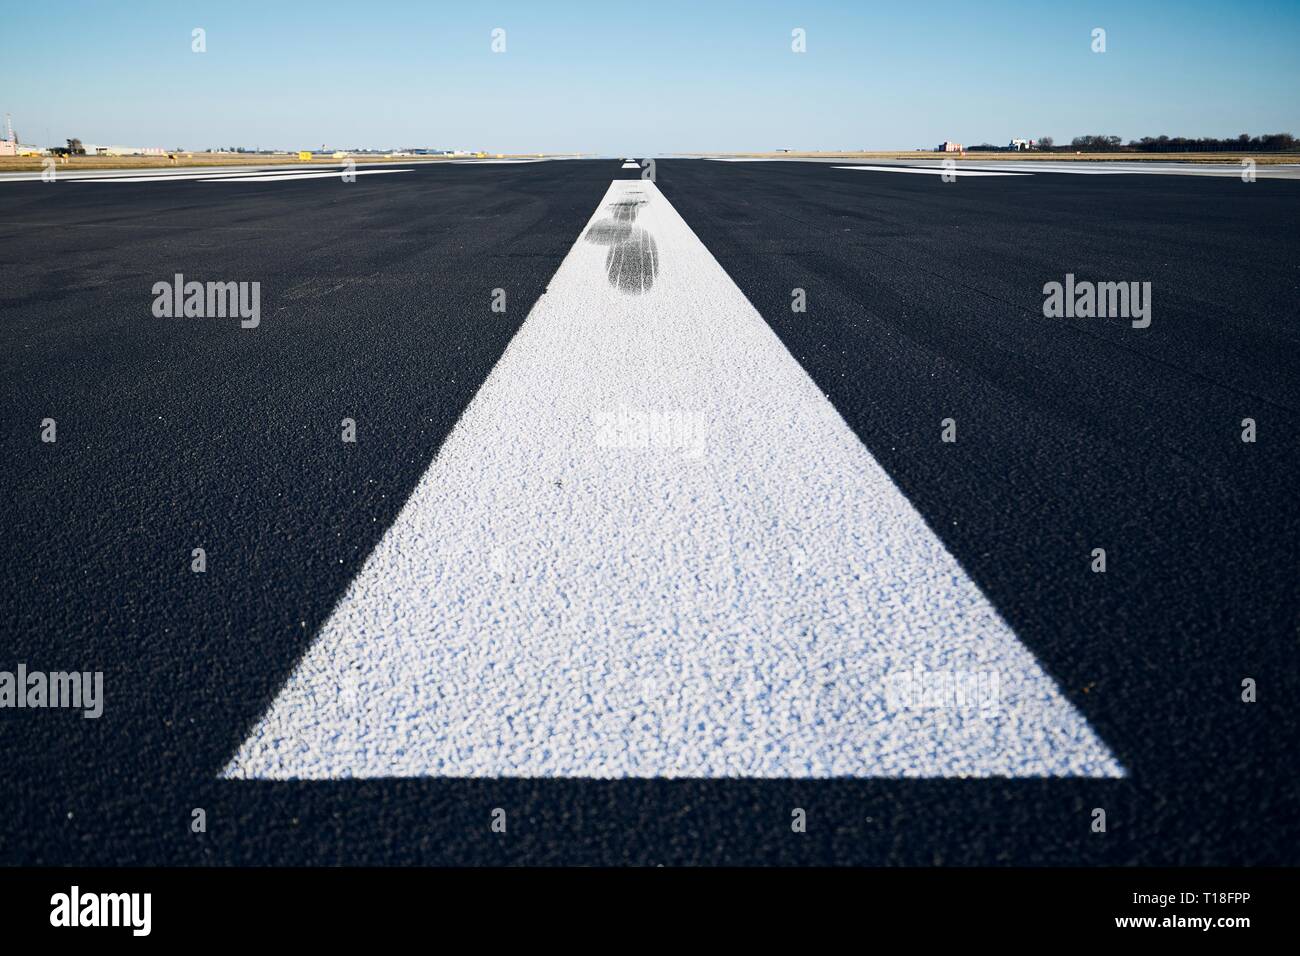 Surface level of airport runway with road marking against clear sky. Stock Photo